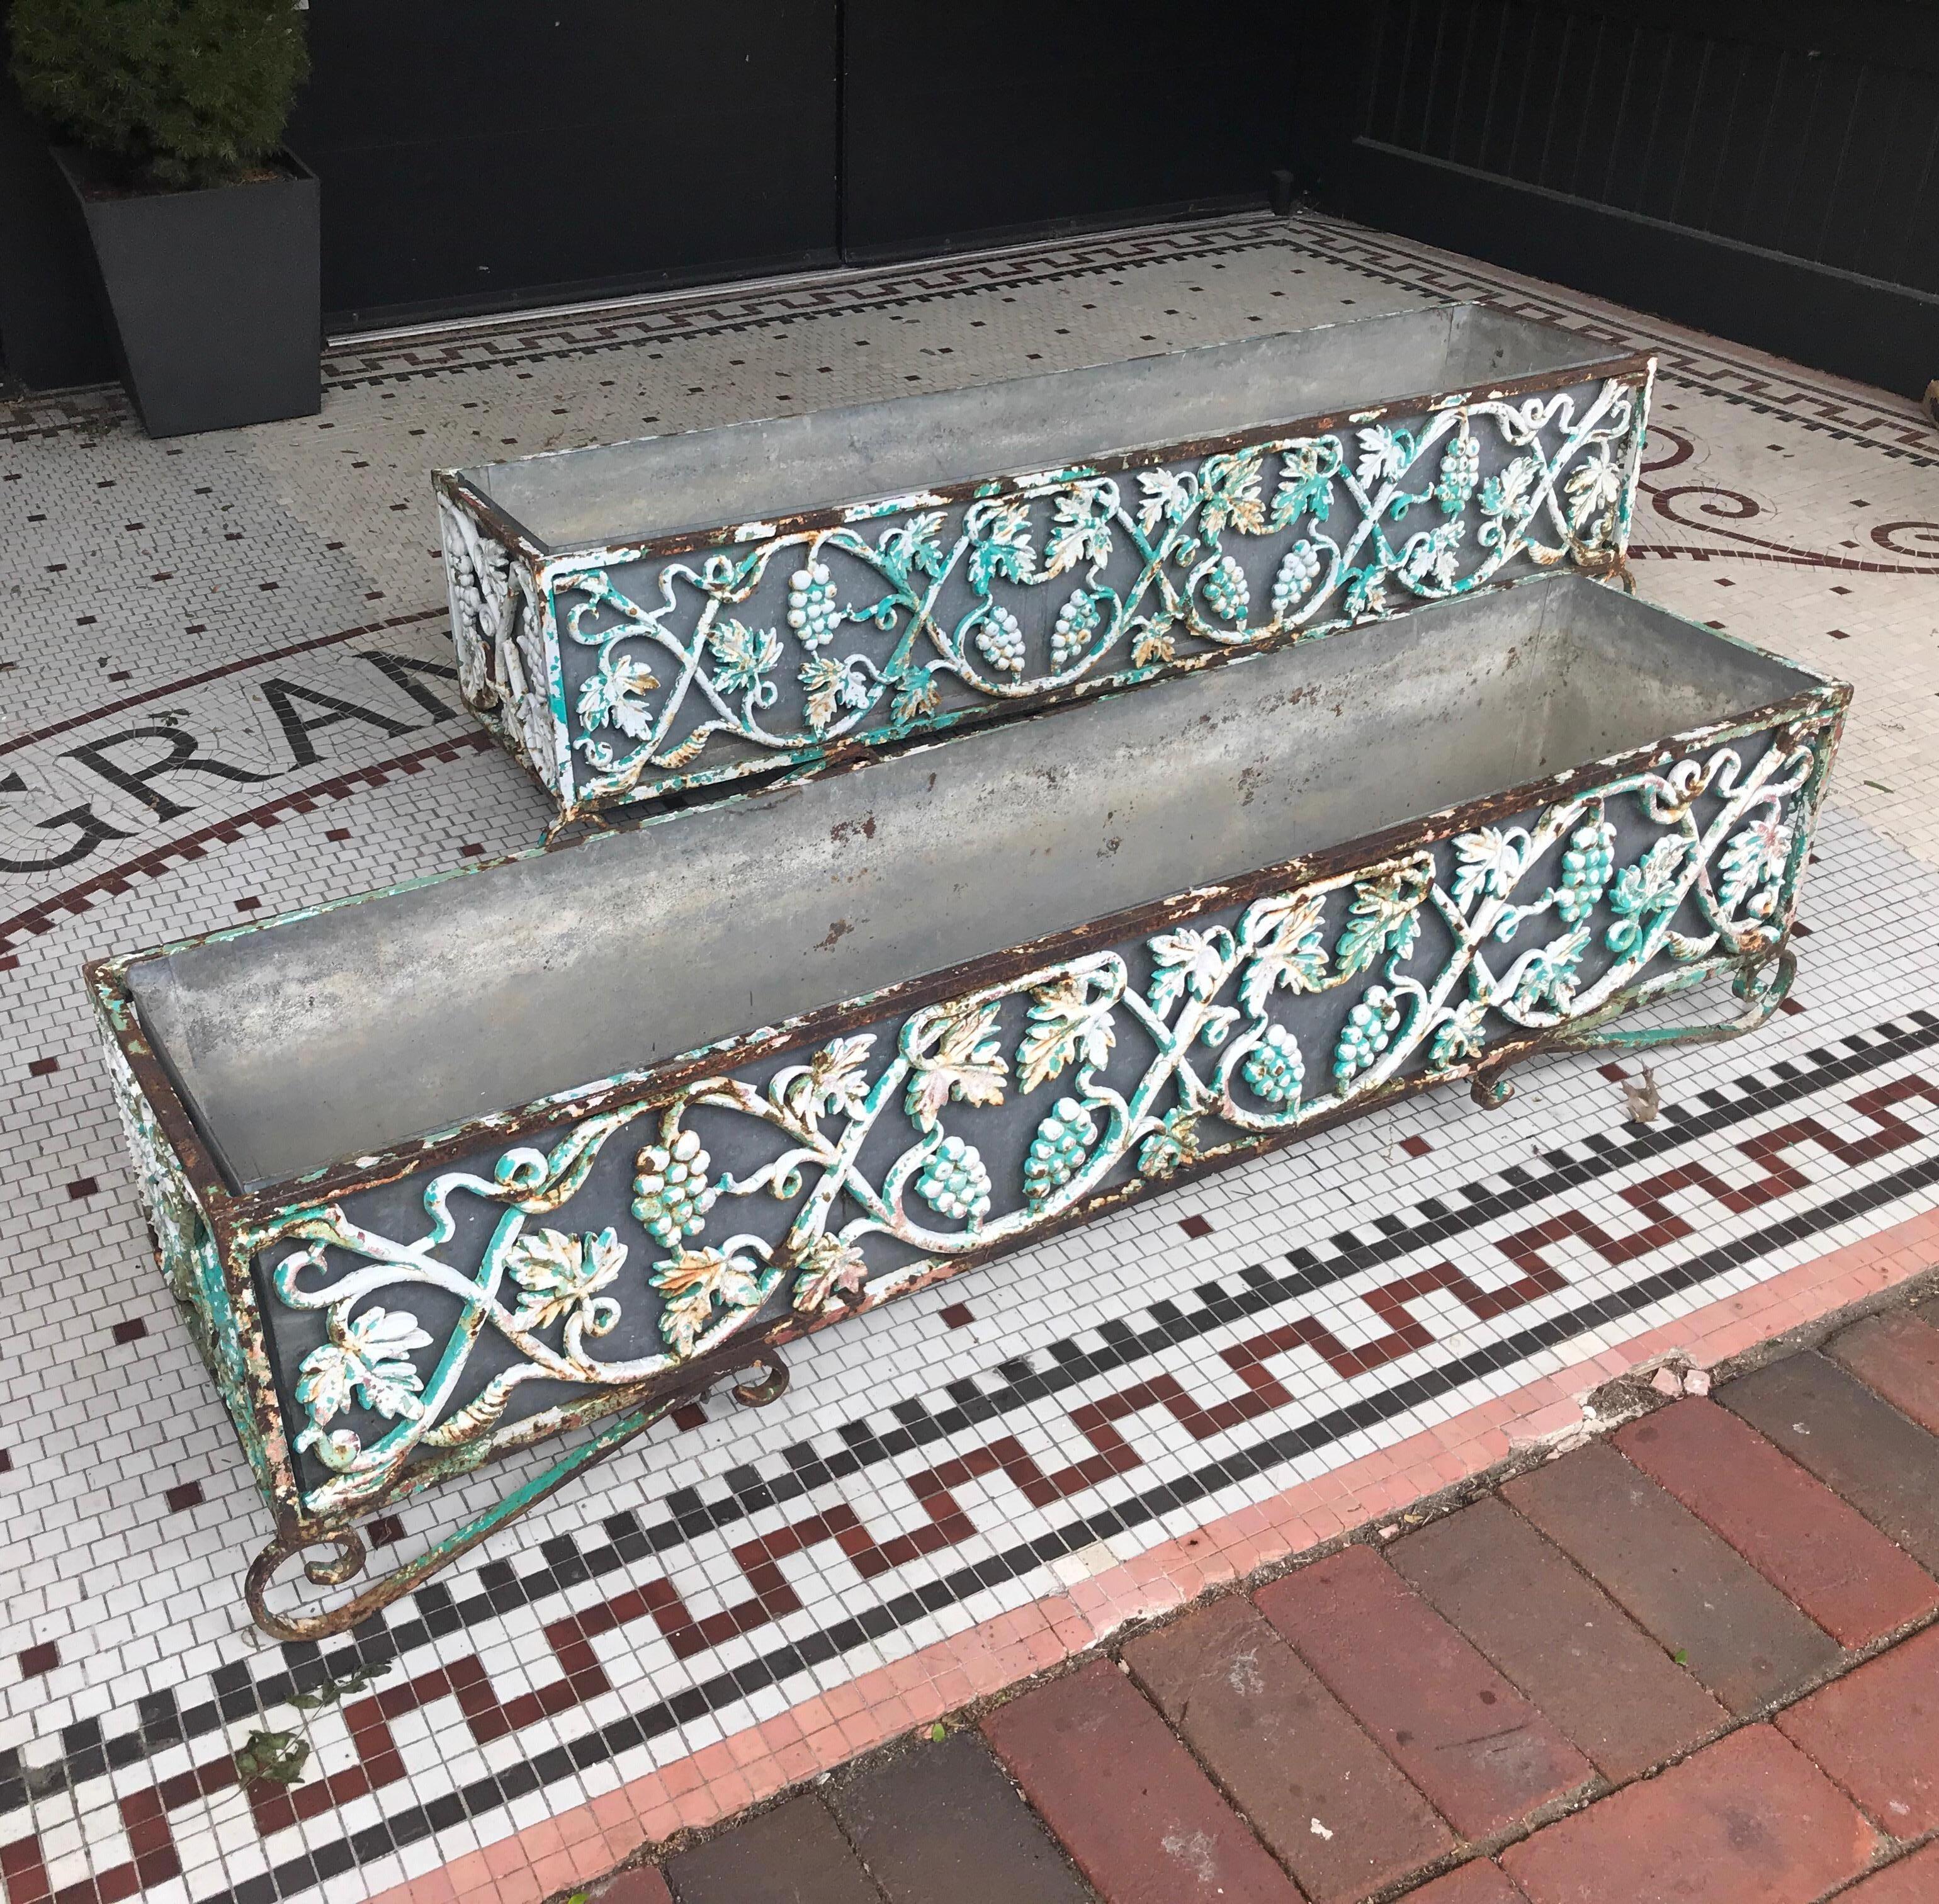 Great pair of early 20th century cast iron planters with galvanized steel liners. The cast iron planters in grape vine and leaf design fitted with galvanized steel liners. Each showing weathered surface and different colors of layered paint.